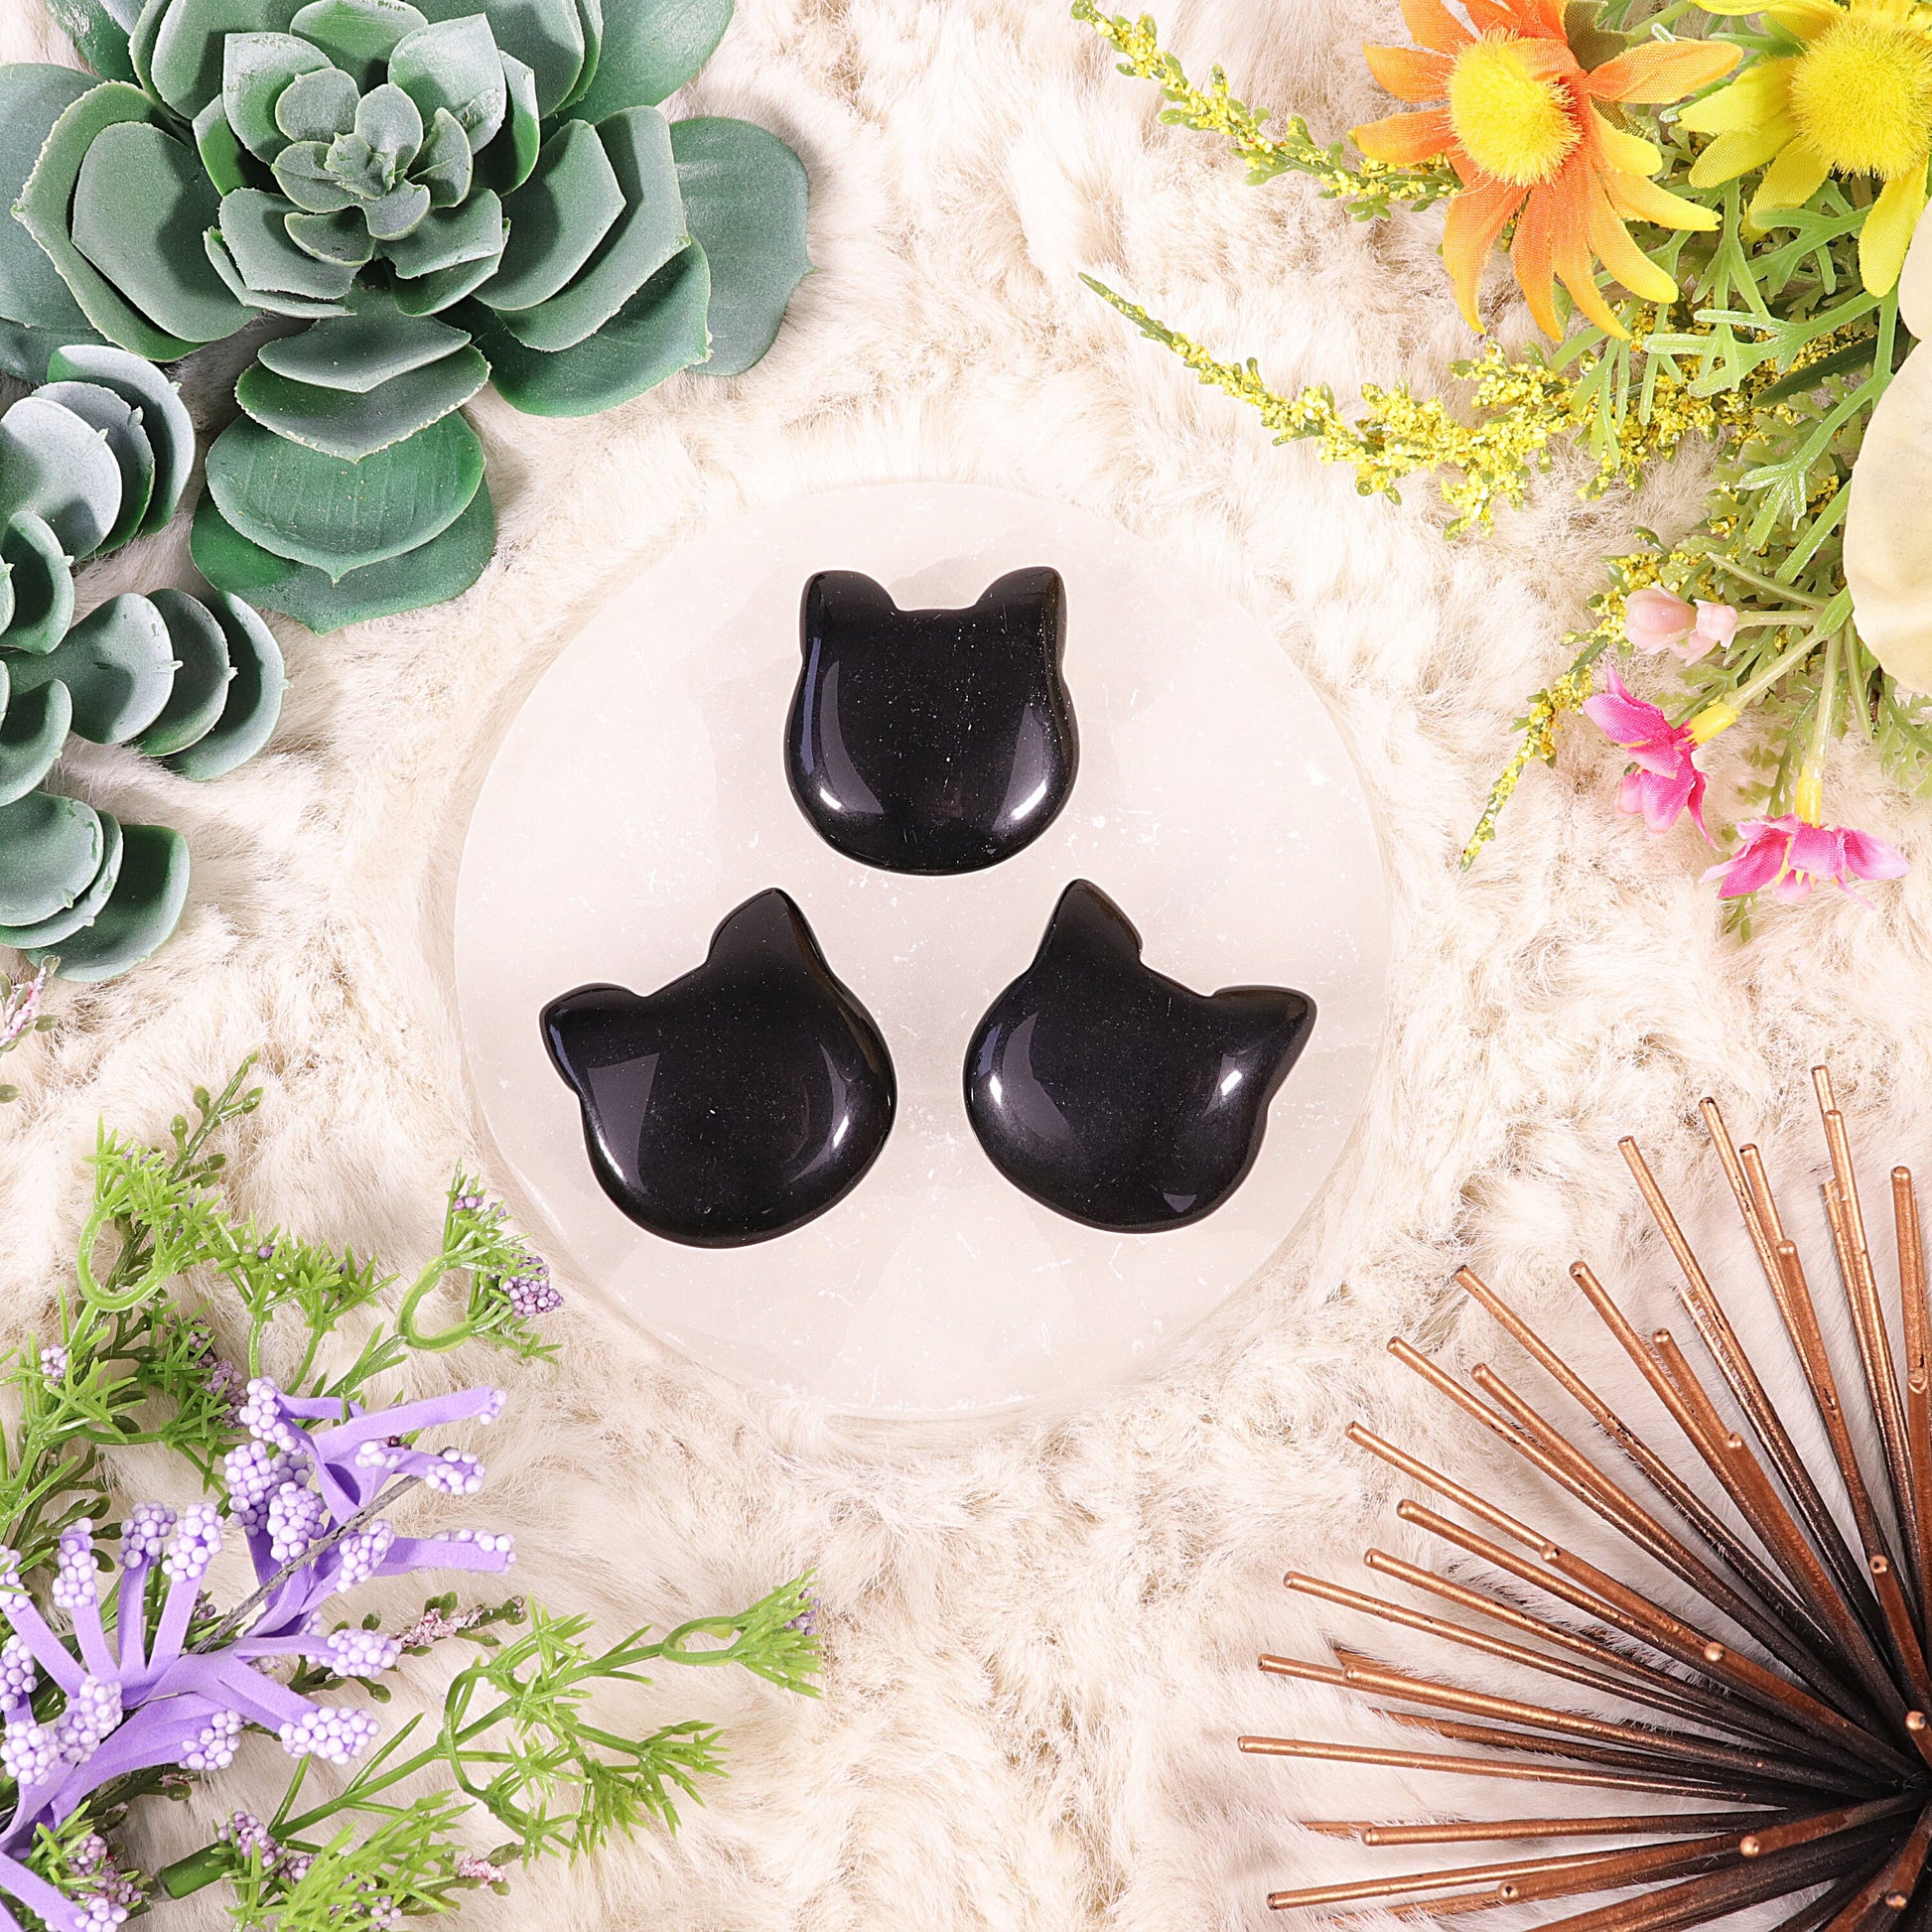 Adorable Crystal Carved Kitty Face, Black Obsidian Gemstone, Protecting Crystal, Animal Statue - SET OF ONE